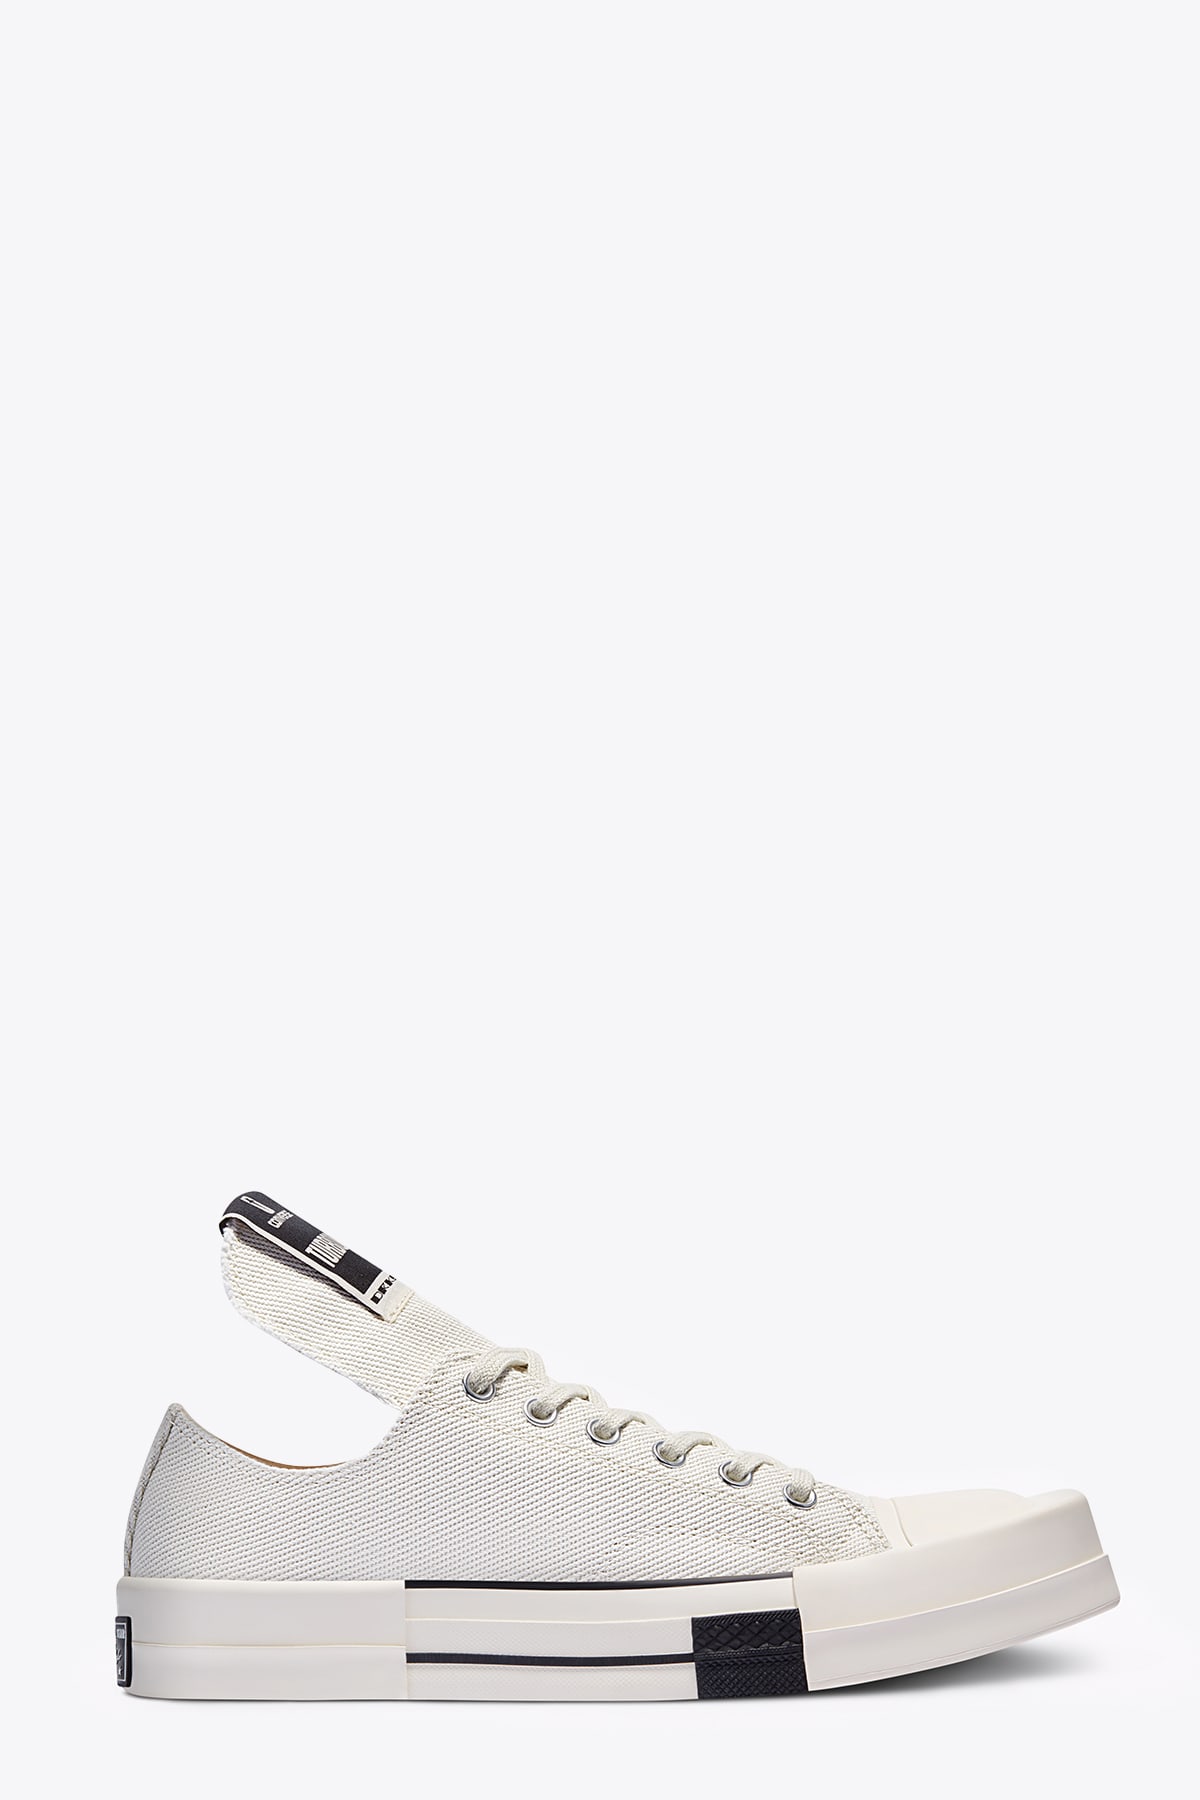 DRKSHDW Turbodrk Ox Rick Owens x Converse official collaboration white sneaker - Turbo dark ox